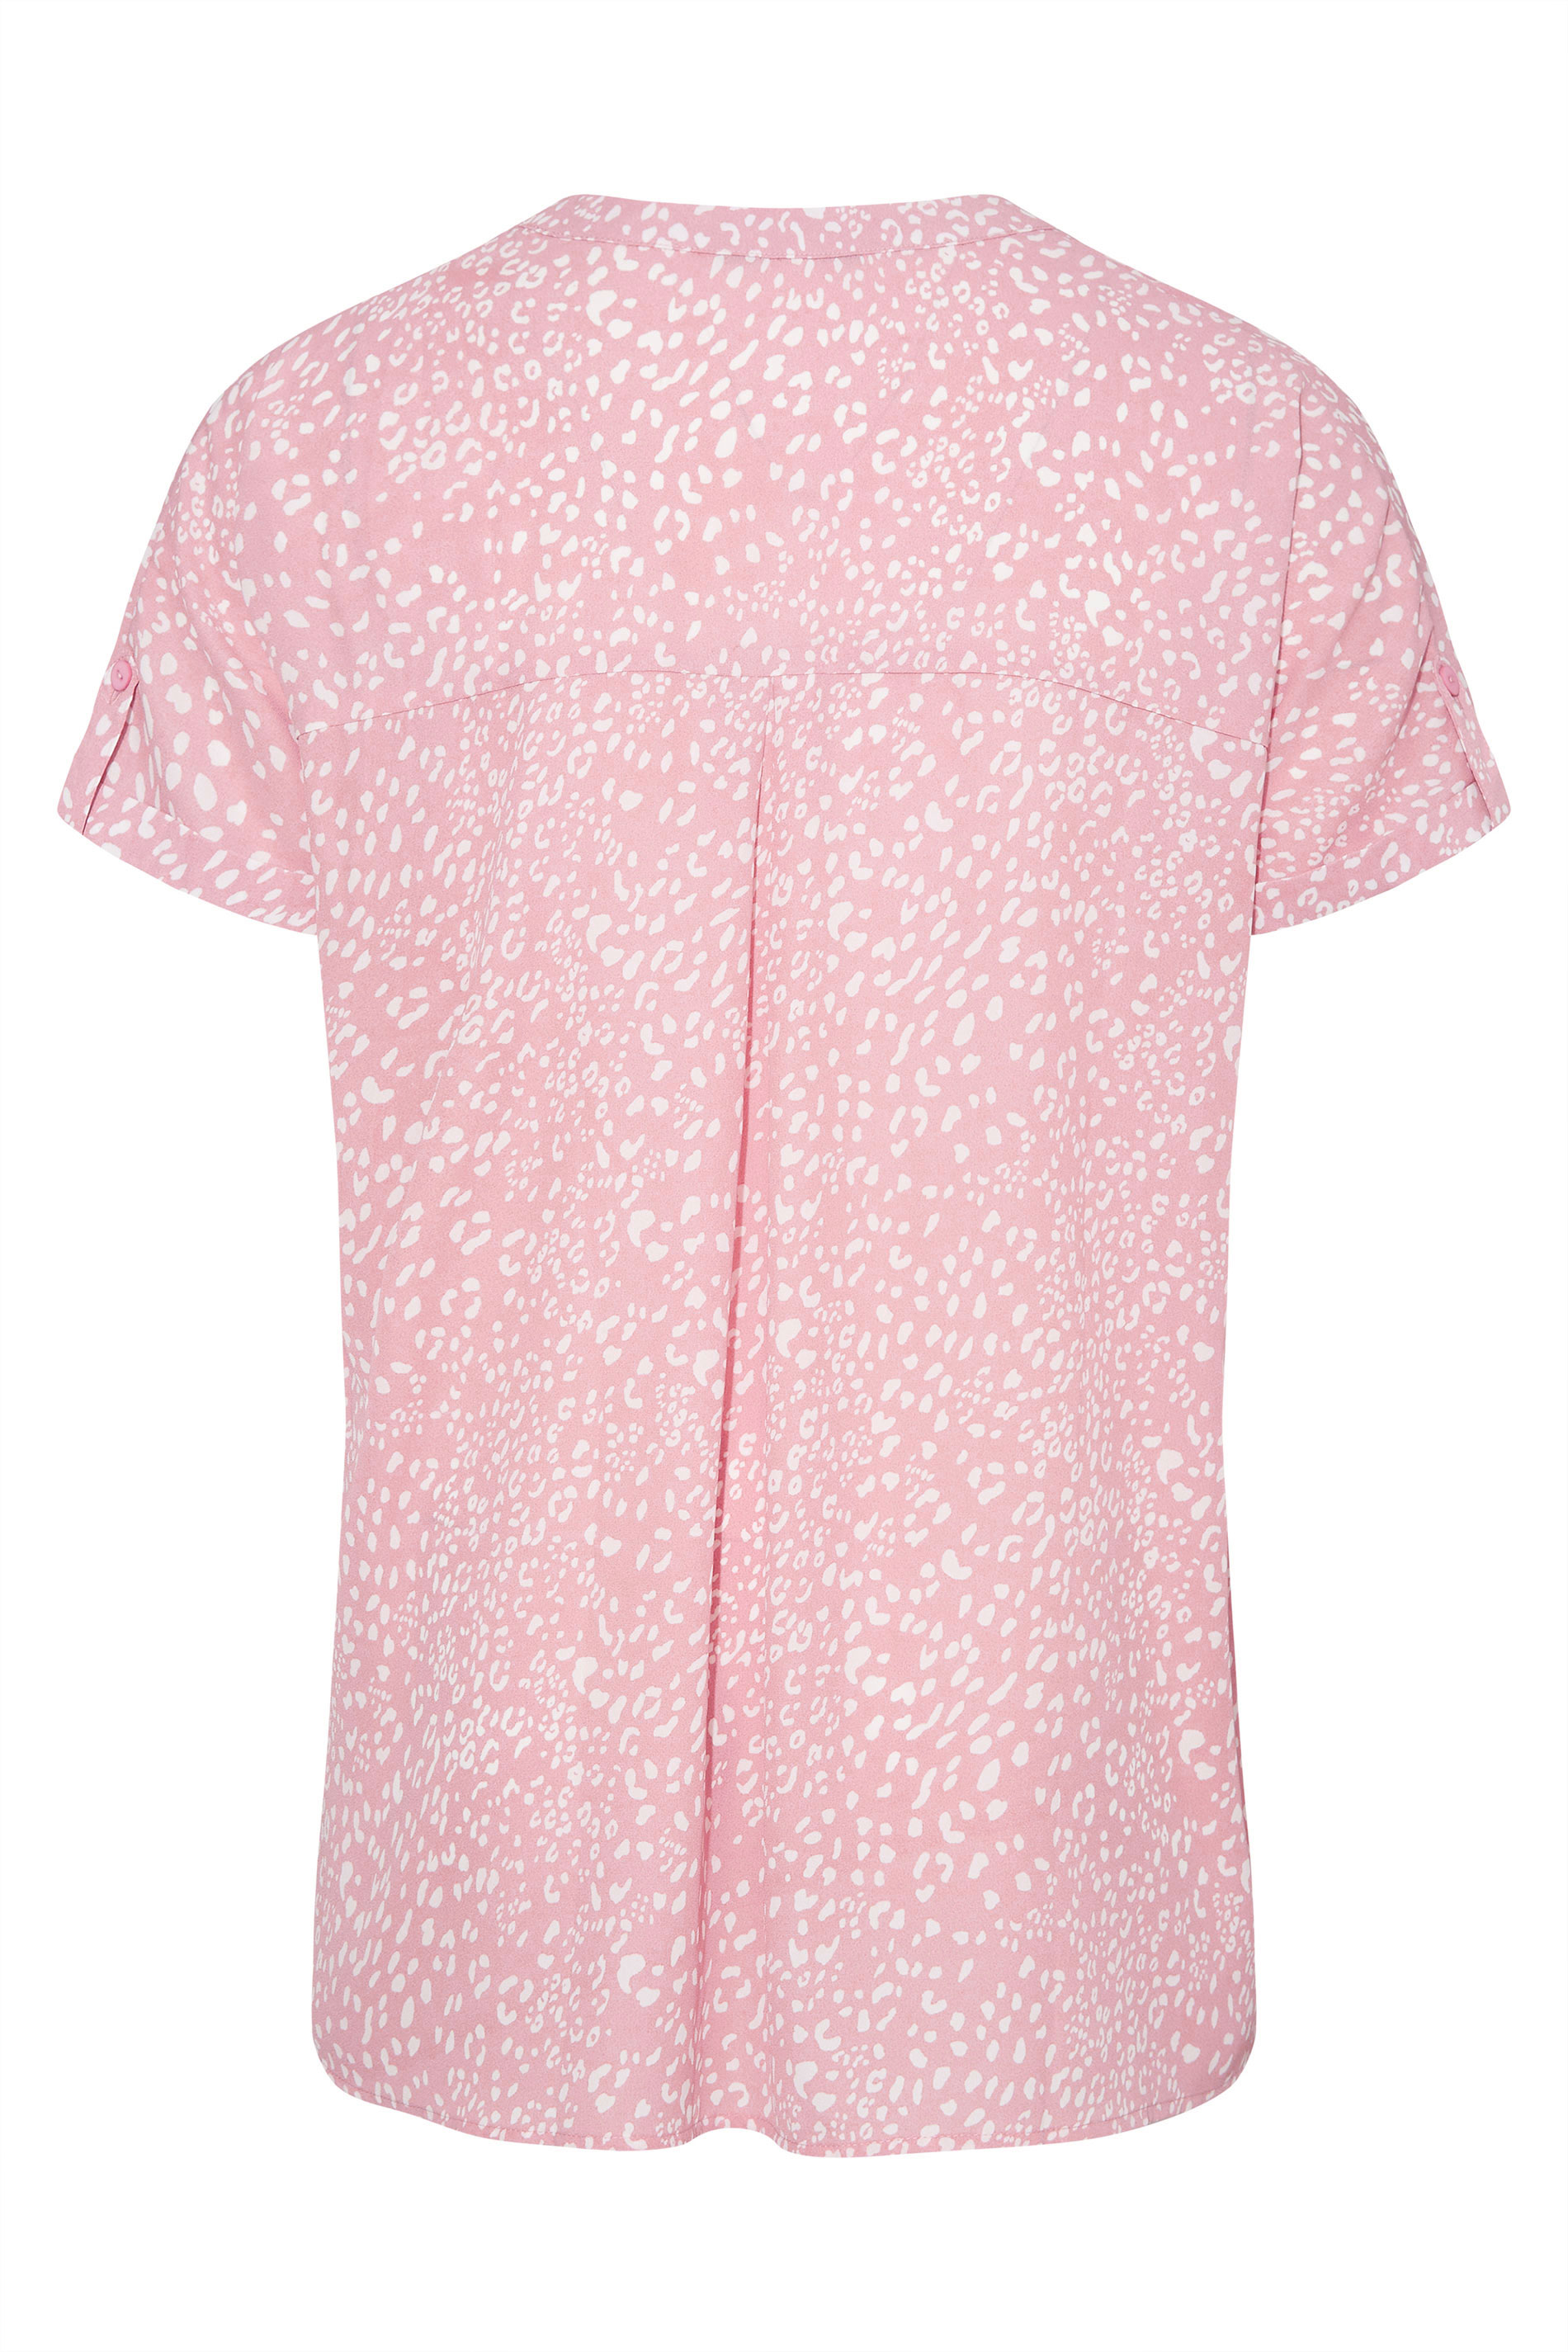 Grande taille  Tops Grande taille  Blouses & Chemisiers | Chemisier Rose Manches Courtes Imprimé Animal - RI93660